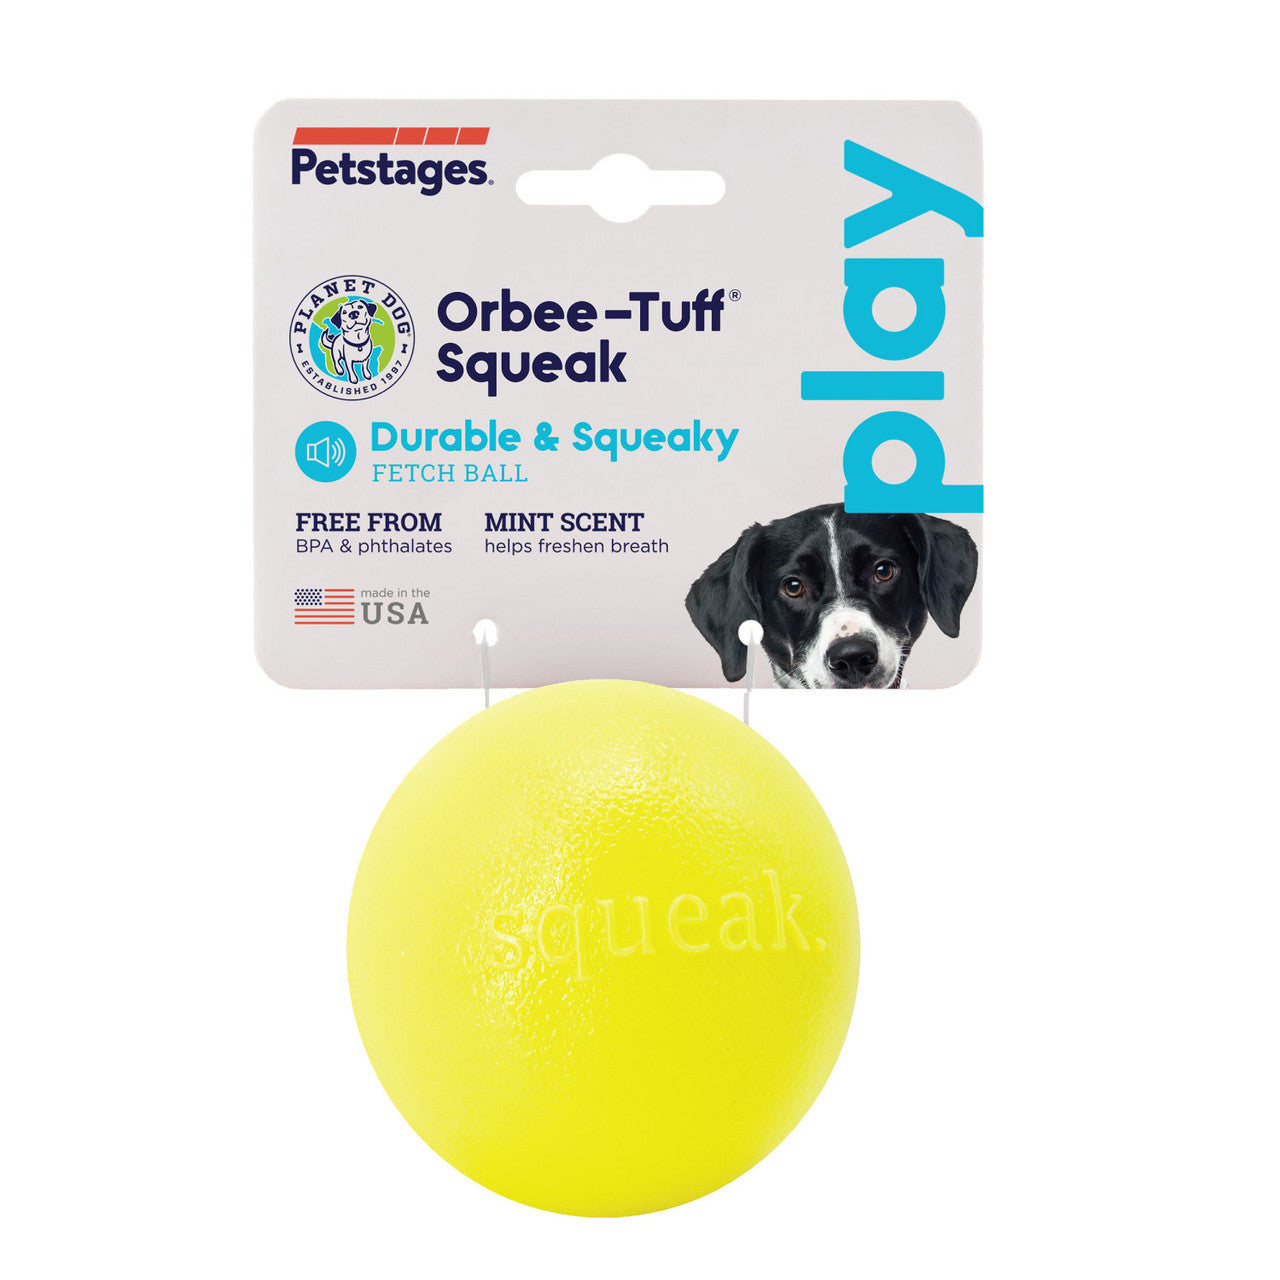 Squeak ball is made from the award-winning Orbee-Tuff material, which is 100% recyclable and non-toxic. Ball is ultra-durable, bouncy, buoyant, and perfect for tossing, fetching, and bouncing. Takes a powerful chewer to make Squeak ... squeak! Toy is infused with natural mint oil.